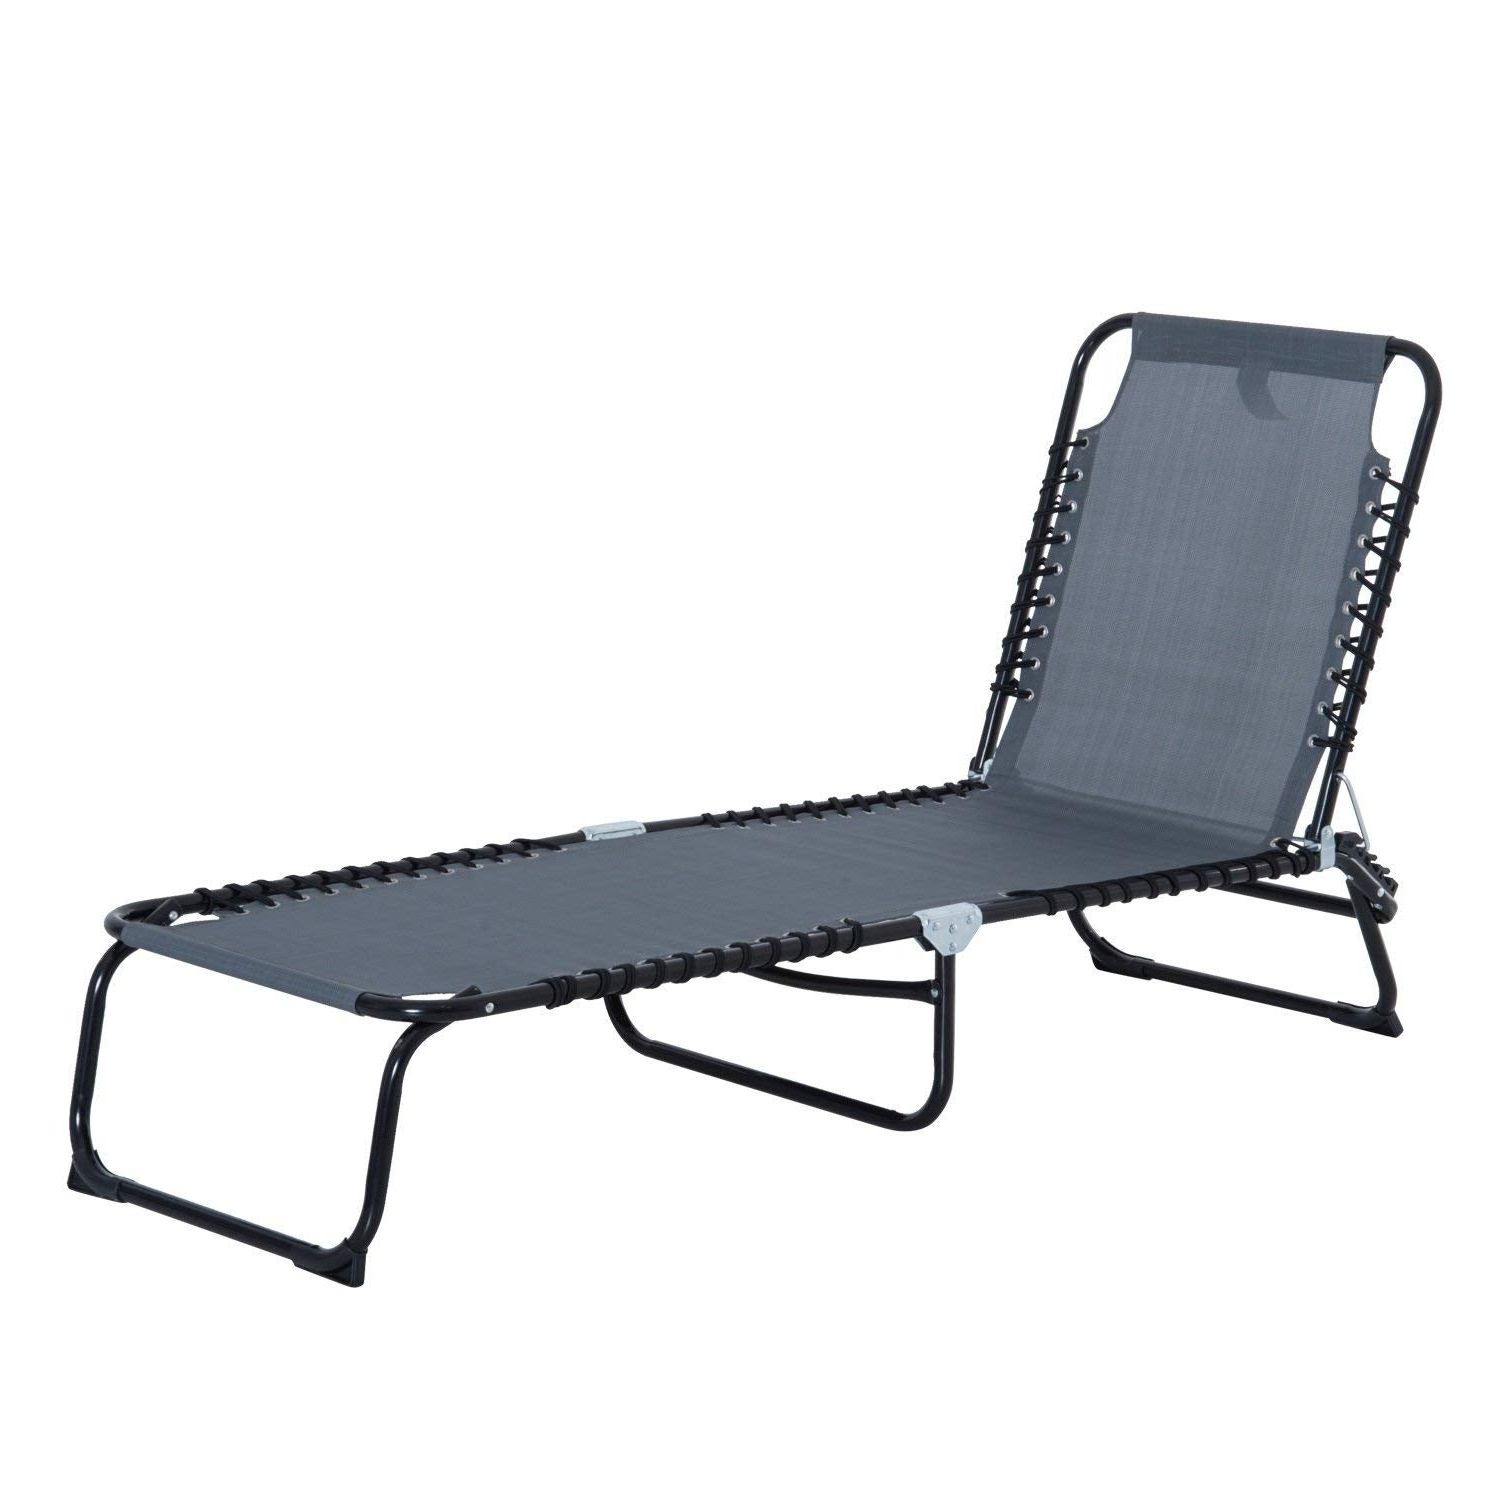 Preferred Portable Reclining Beach Chaise Lounge Folding Chairs Within Outsunny 3 Position Portable Reclining Beach Chaise Lounge Folding Chair  Outdoor Patio – Grey (View 3 of 25)